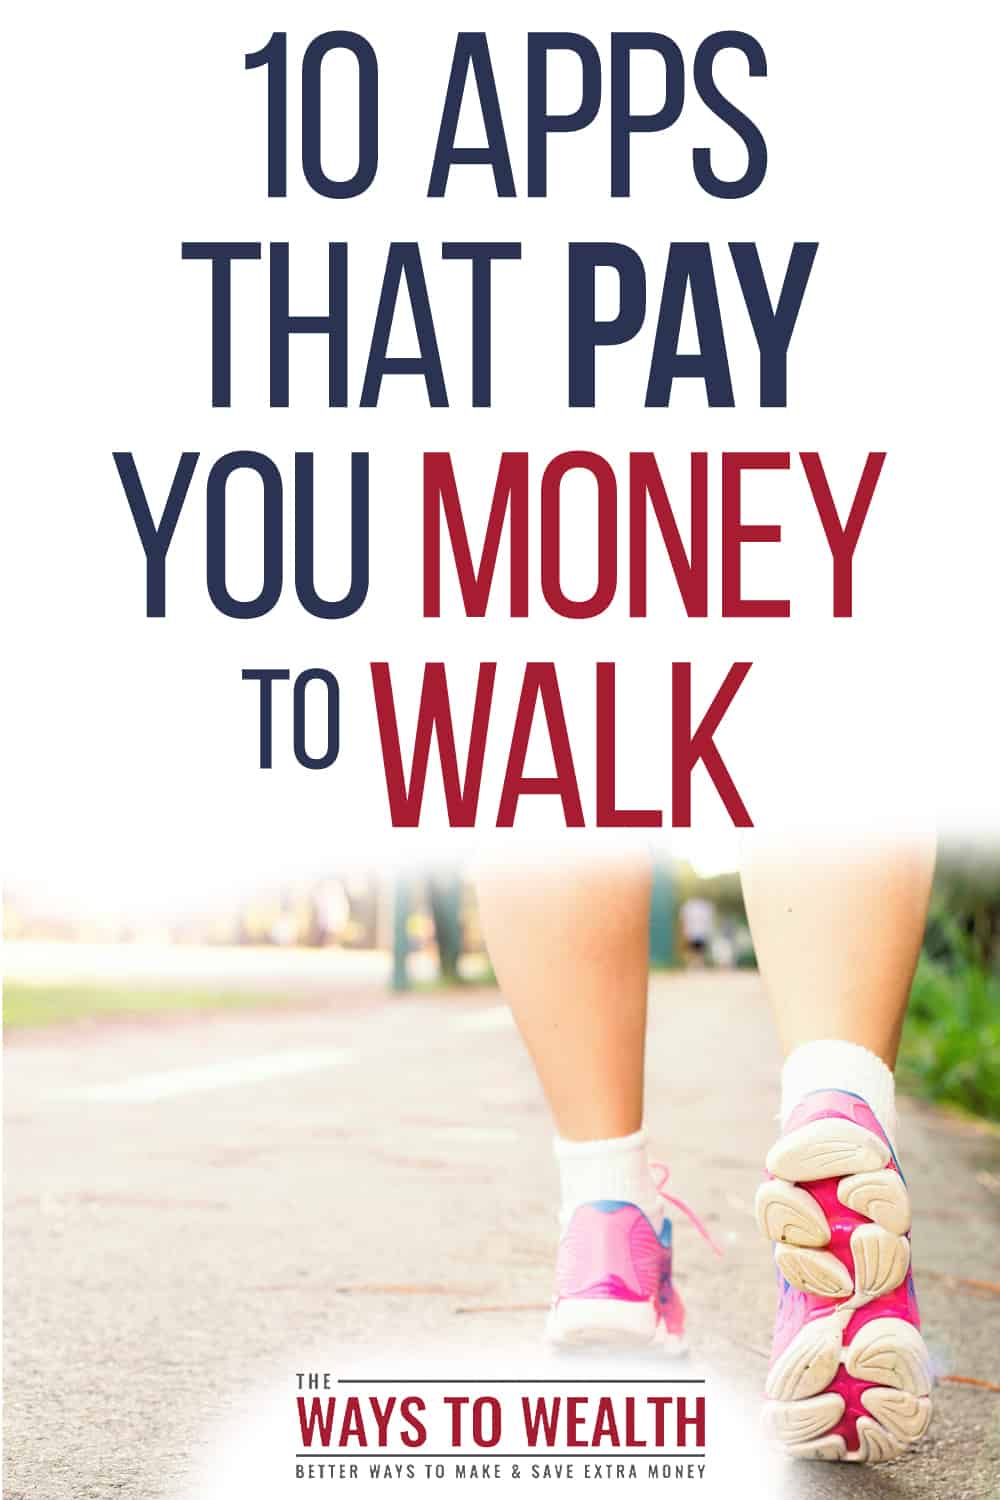 9 Best Apps That Pay You To Walk [2022] iOS & Android